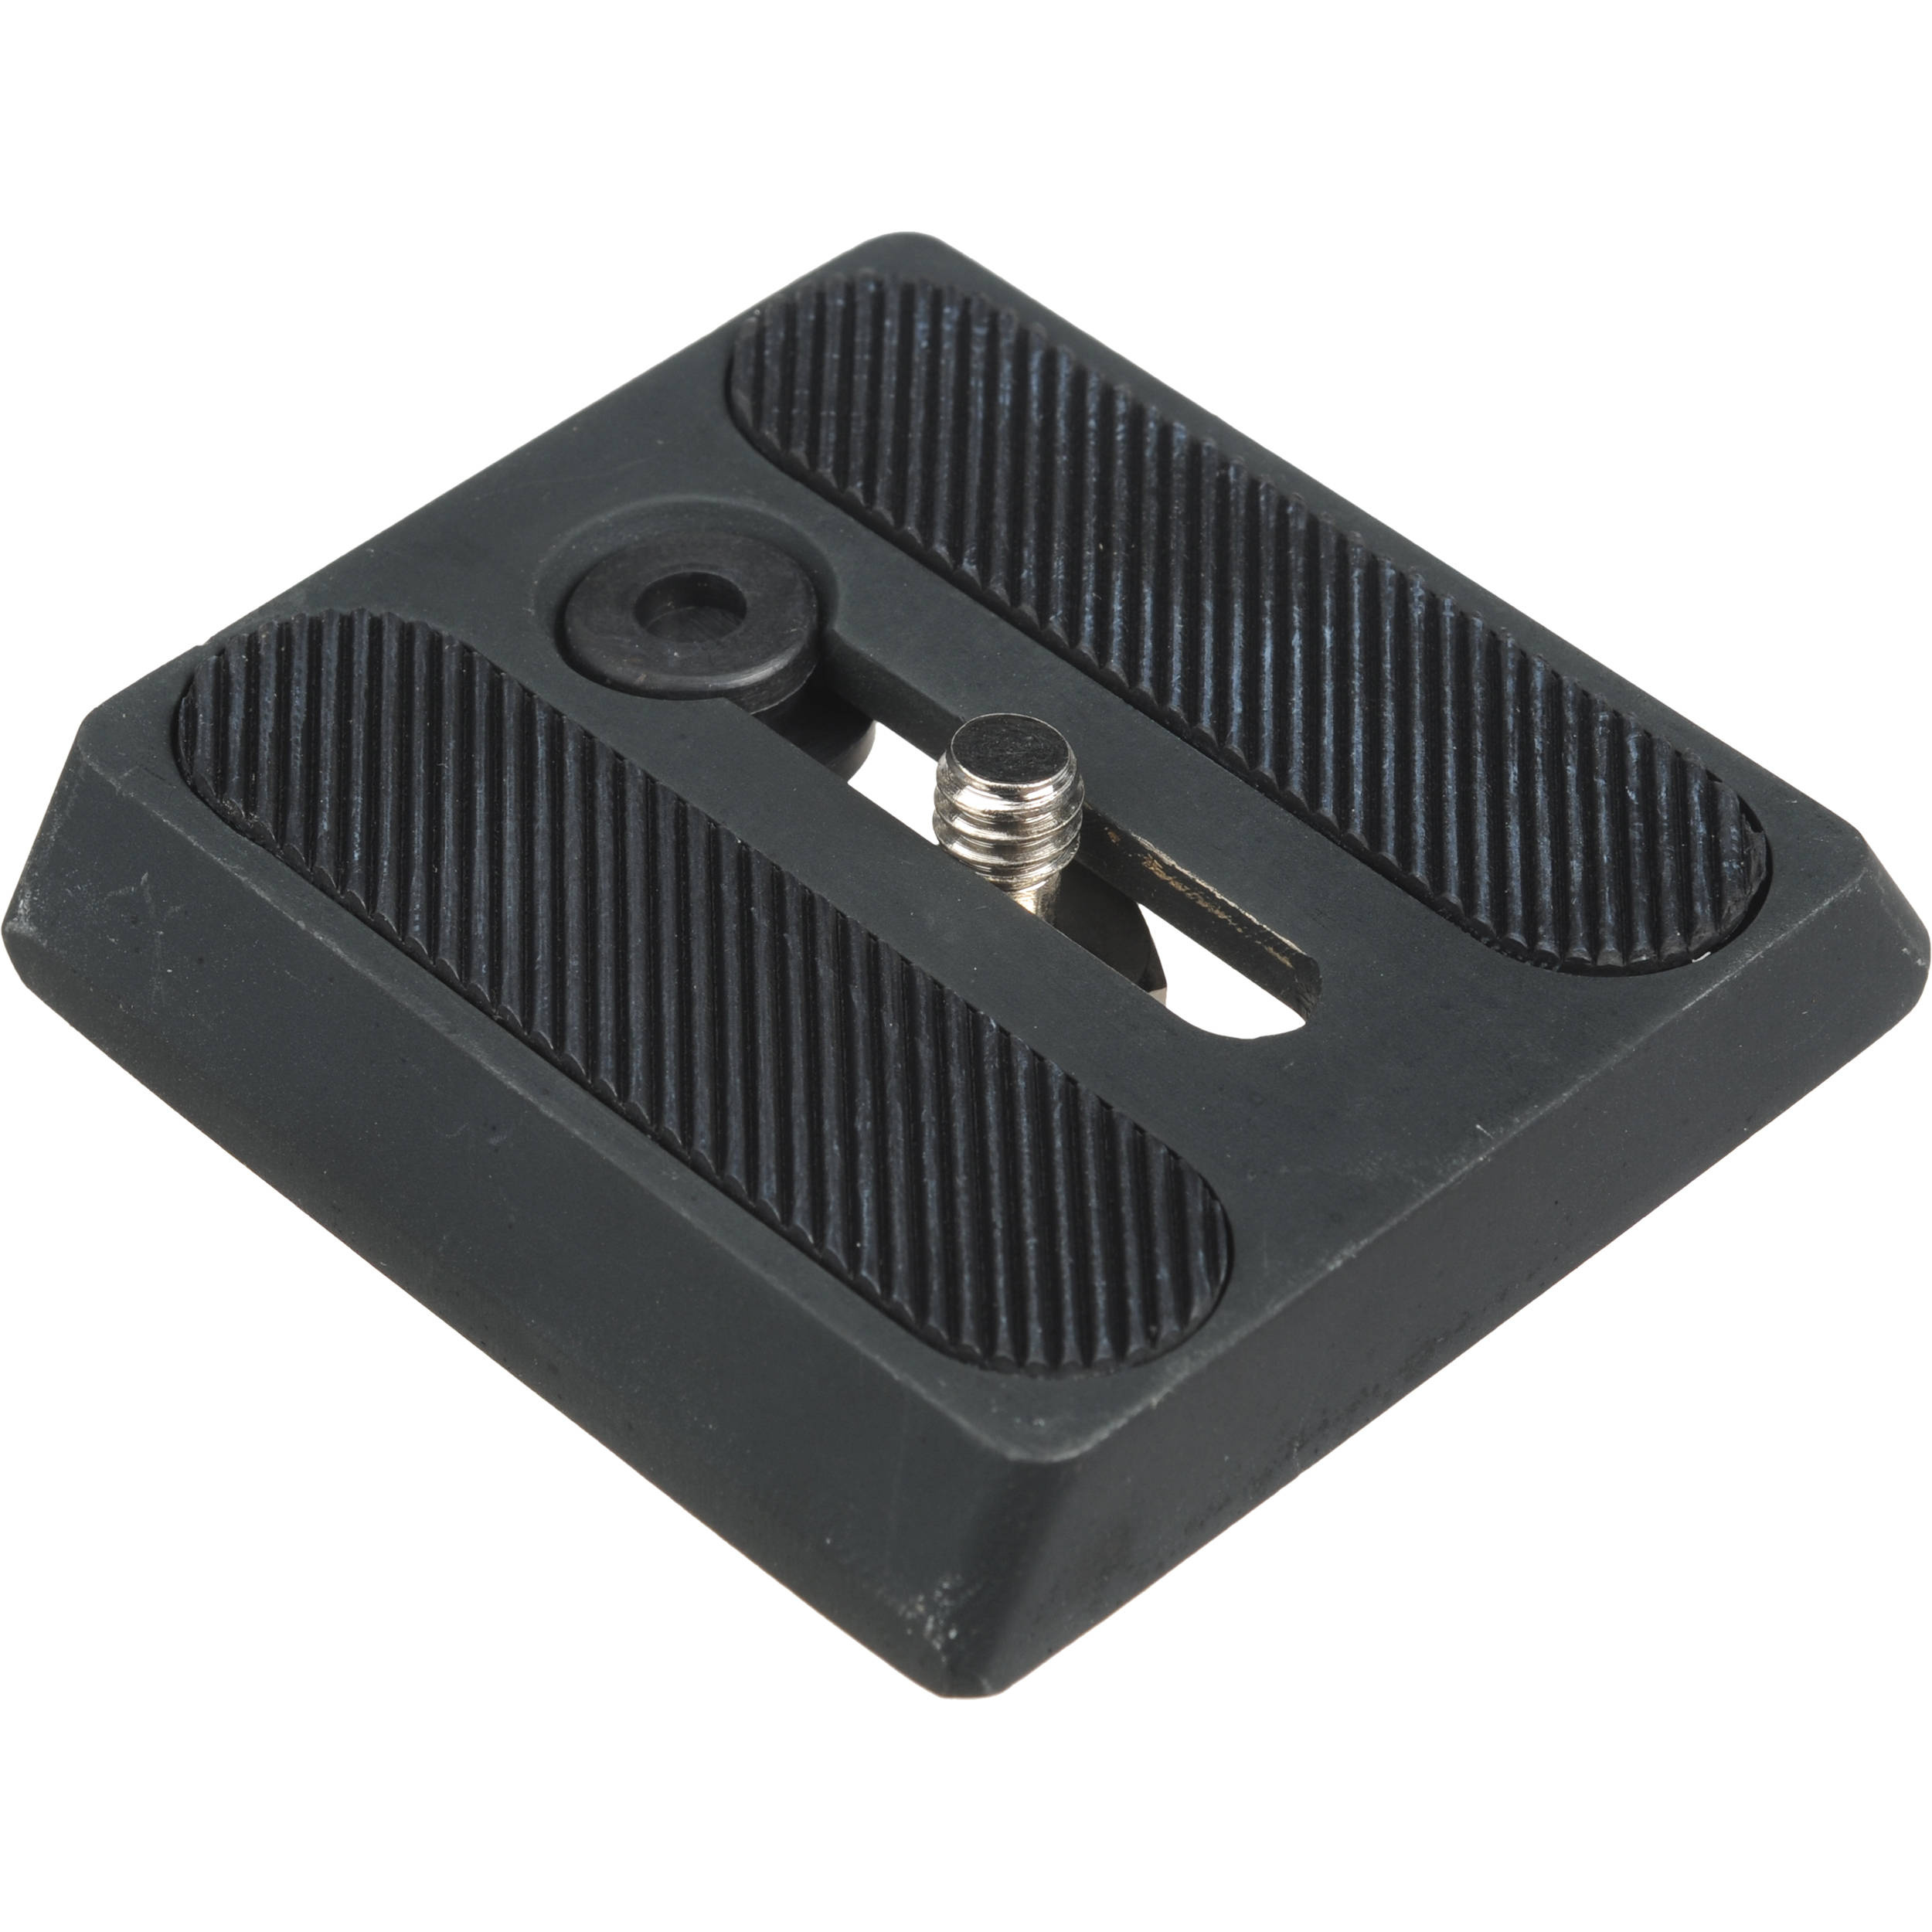 Benro PH-09 Quick Release Plate for BH-2-M Ball Heads